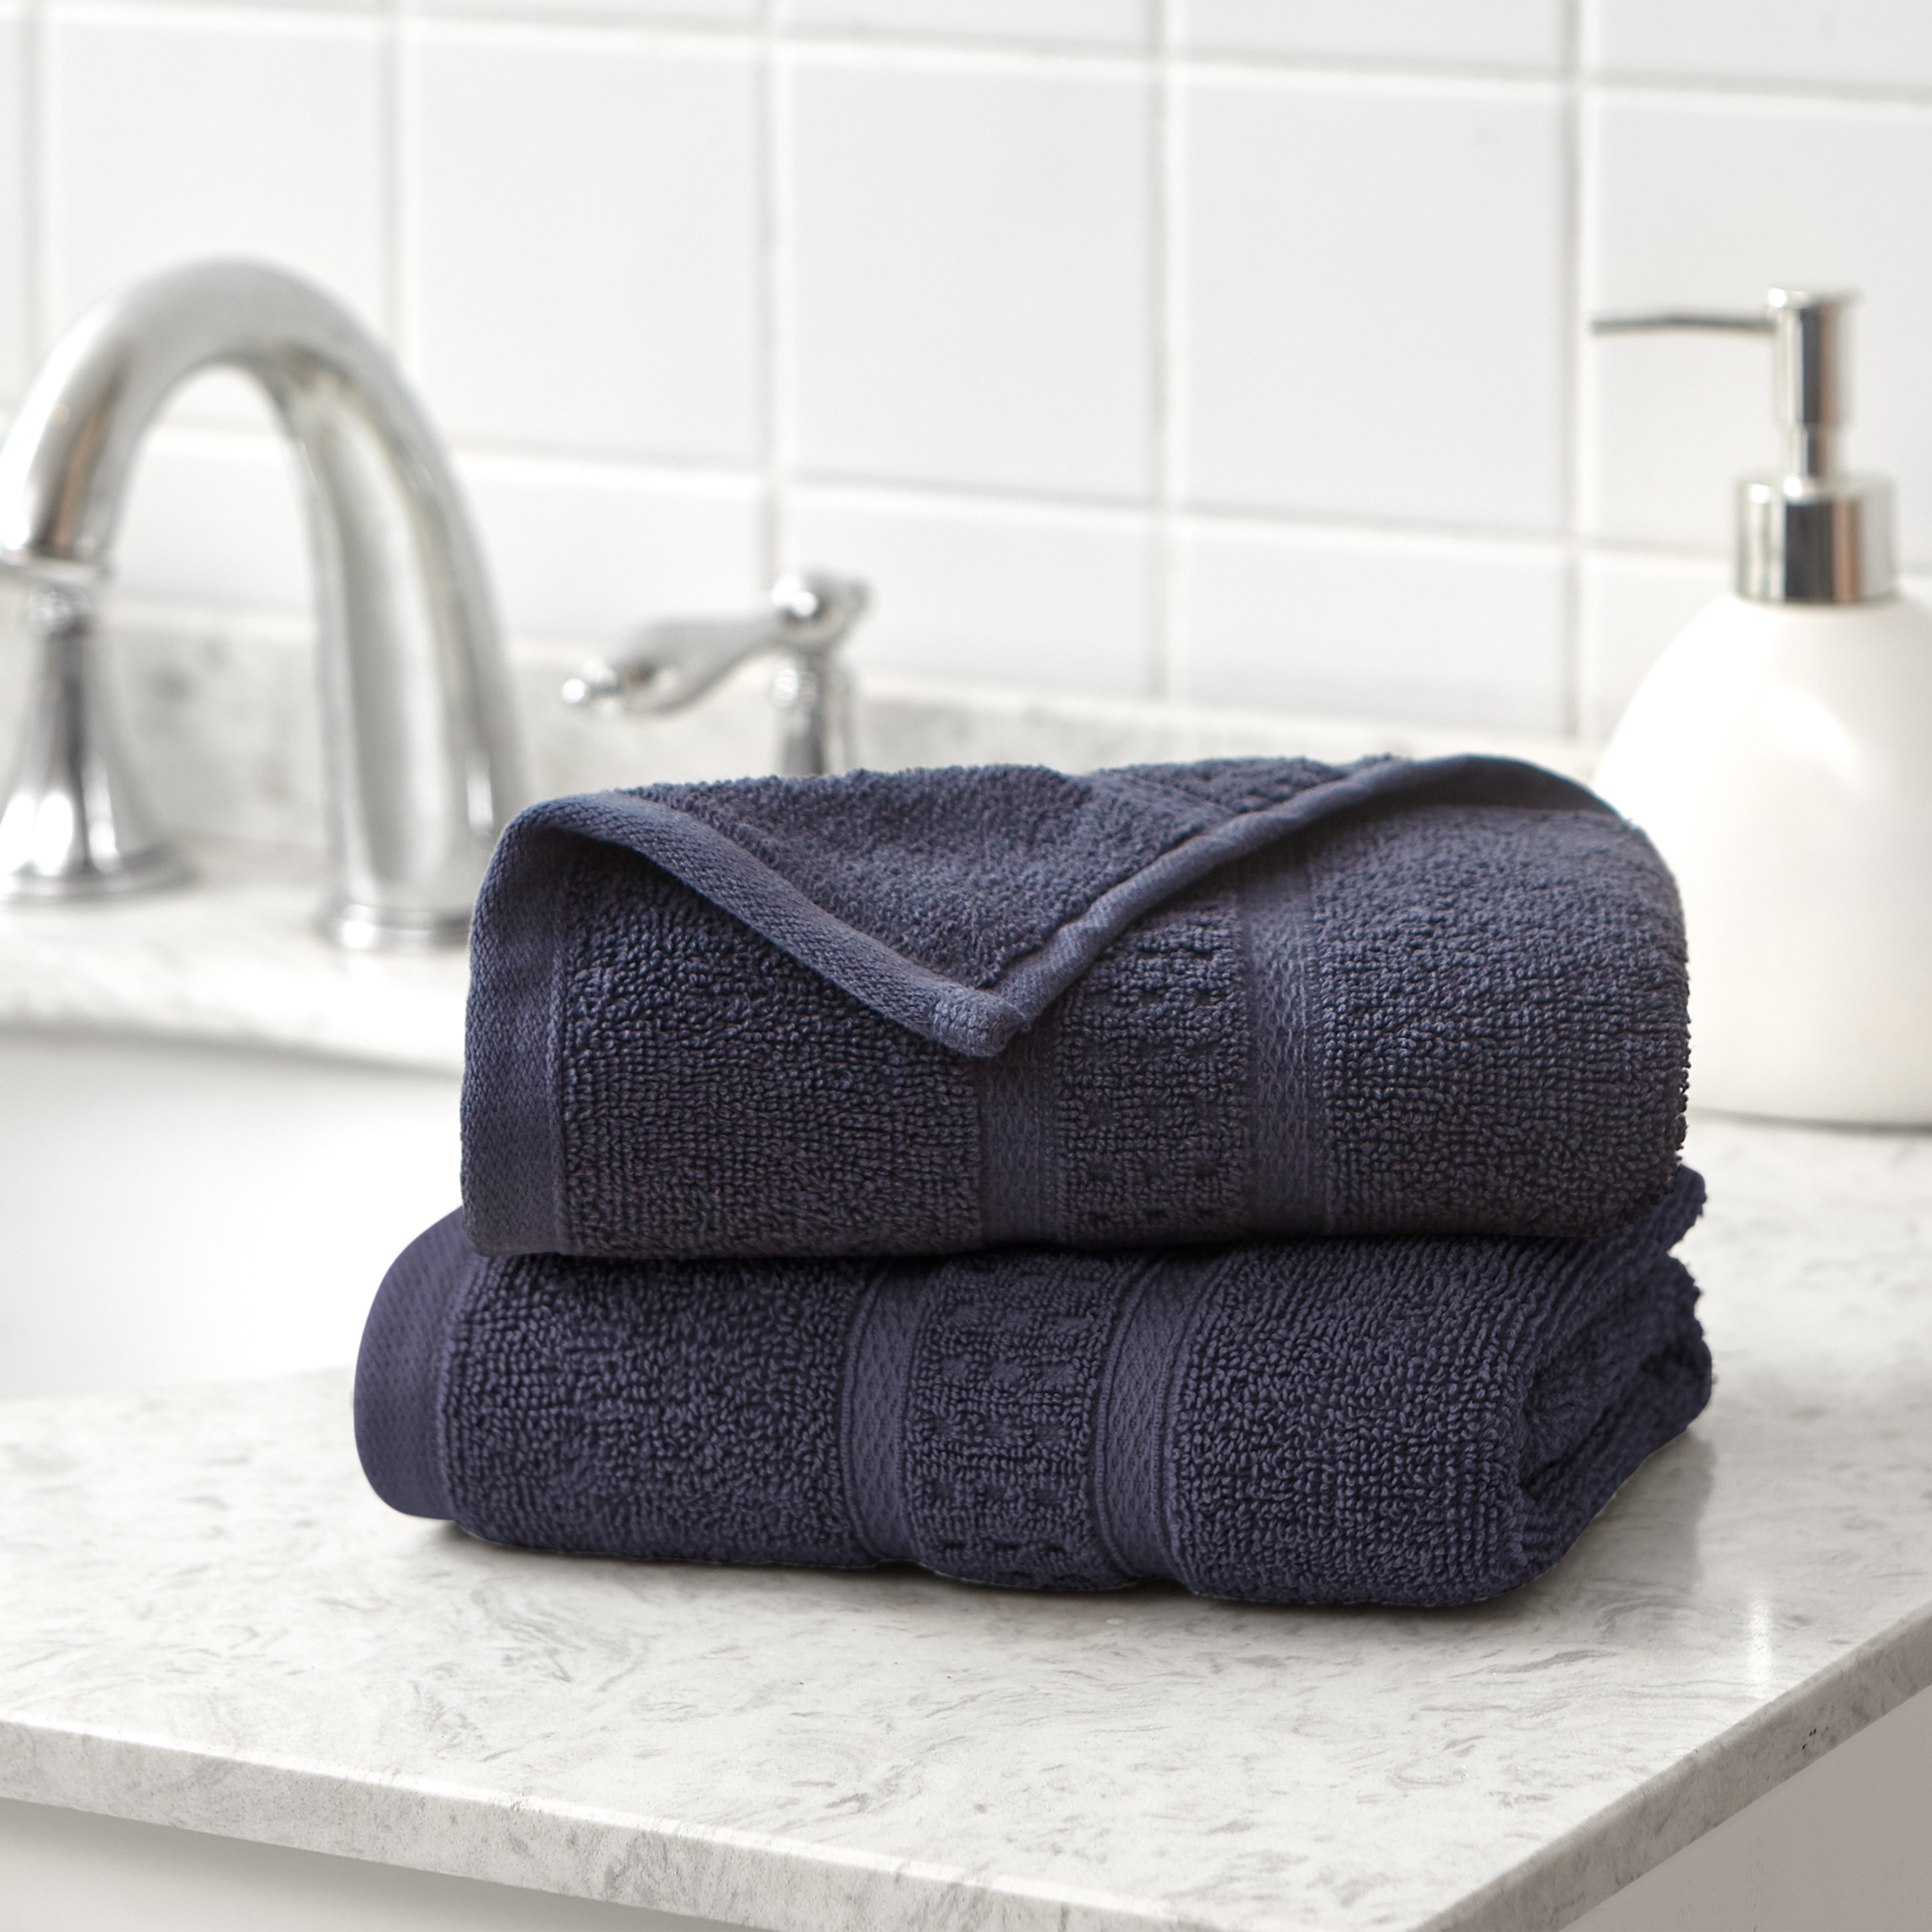 https://ak1.ostkcdn.com/images/products/is/images/direct/bfd070d0fb4b1e38ef4cce8b2967e24fb873a2c8/Nautica-Oceane-Solid-Wellness-Towel-Collection.jpg